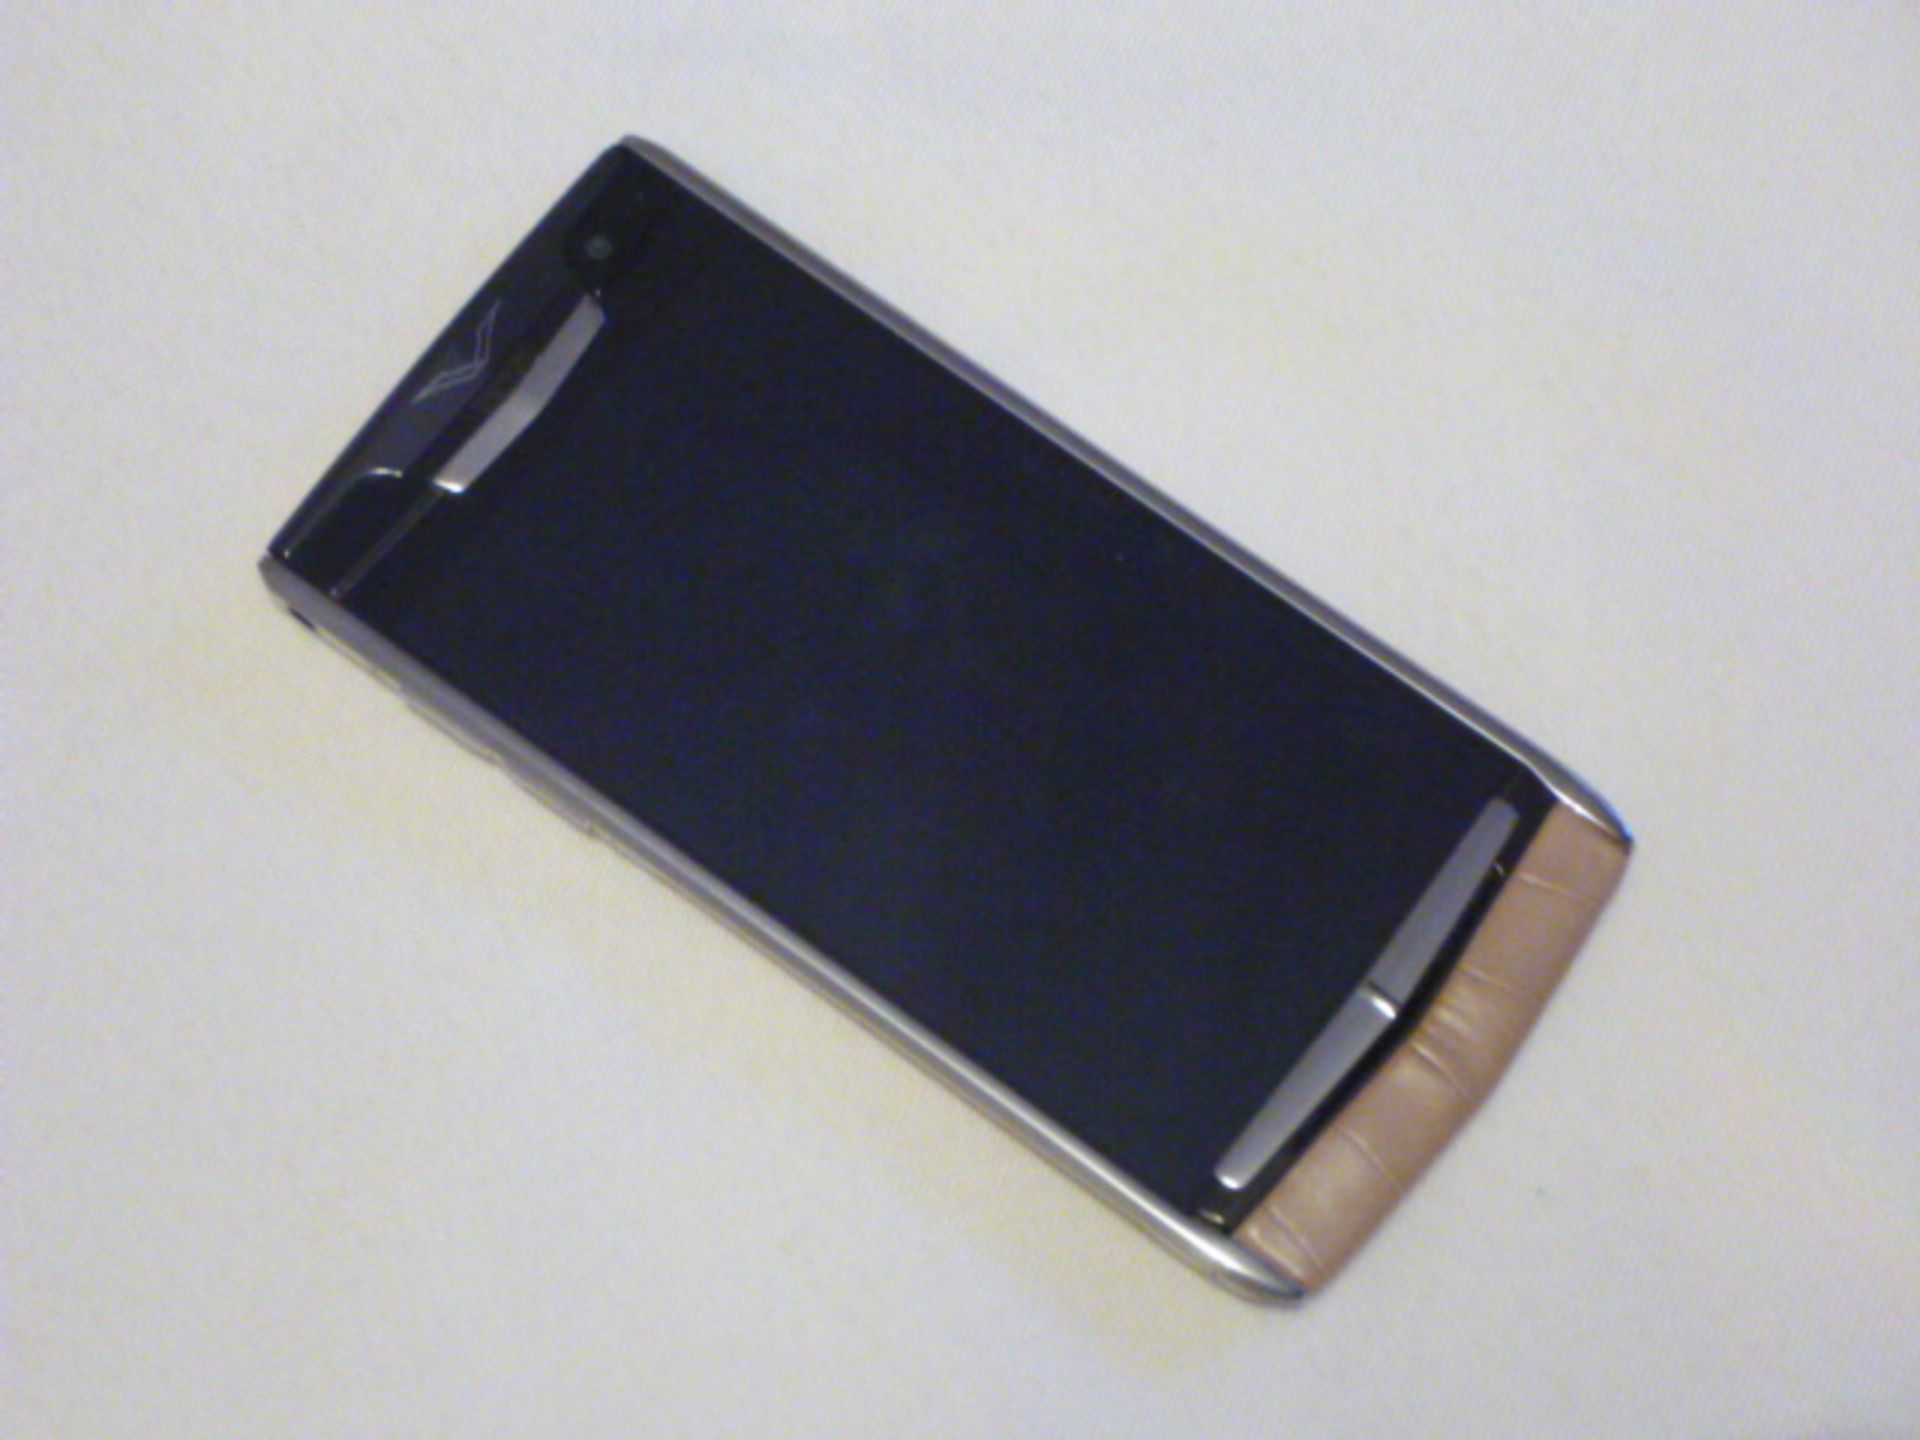 Vertu Signature Touch Phone with Almond Alligator, S/N 3-021611. Comes with Sales Pack & Charging